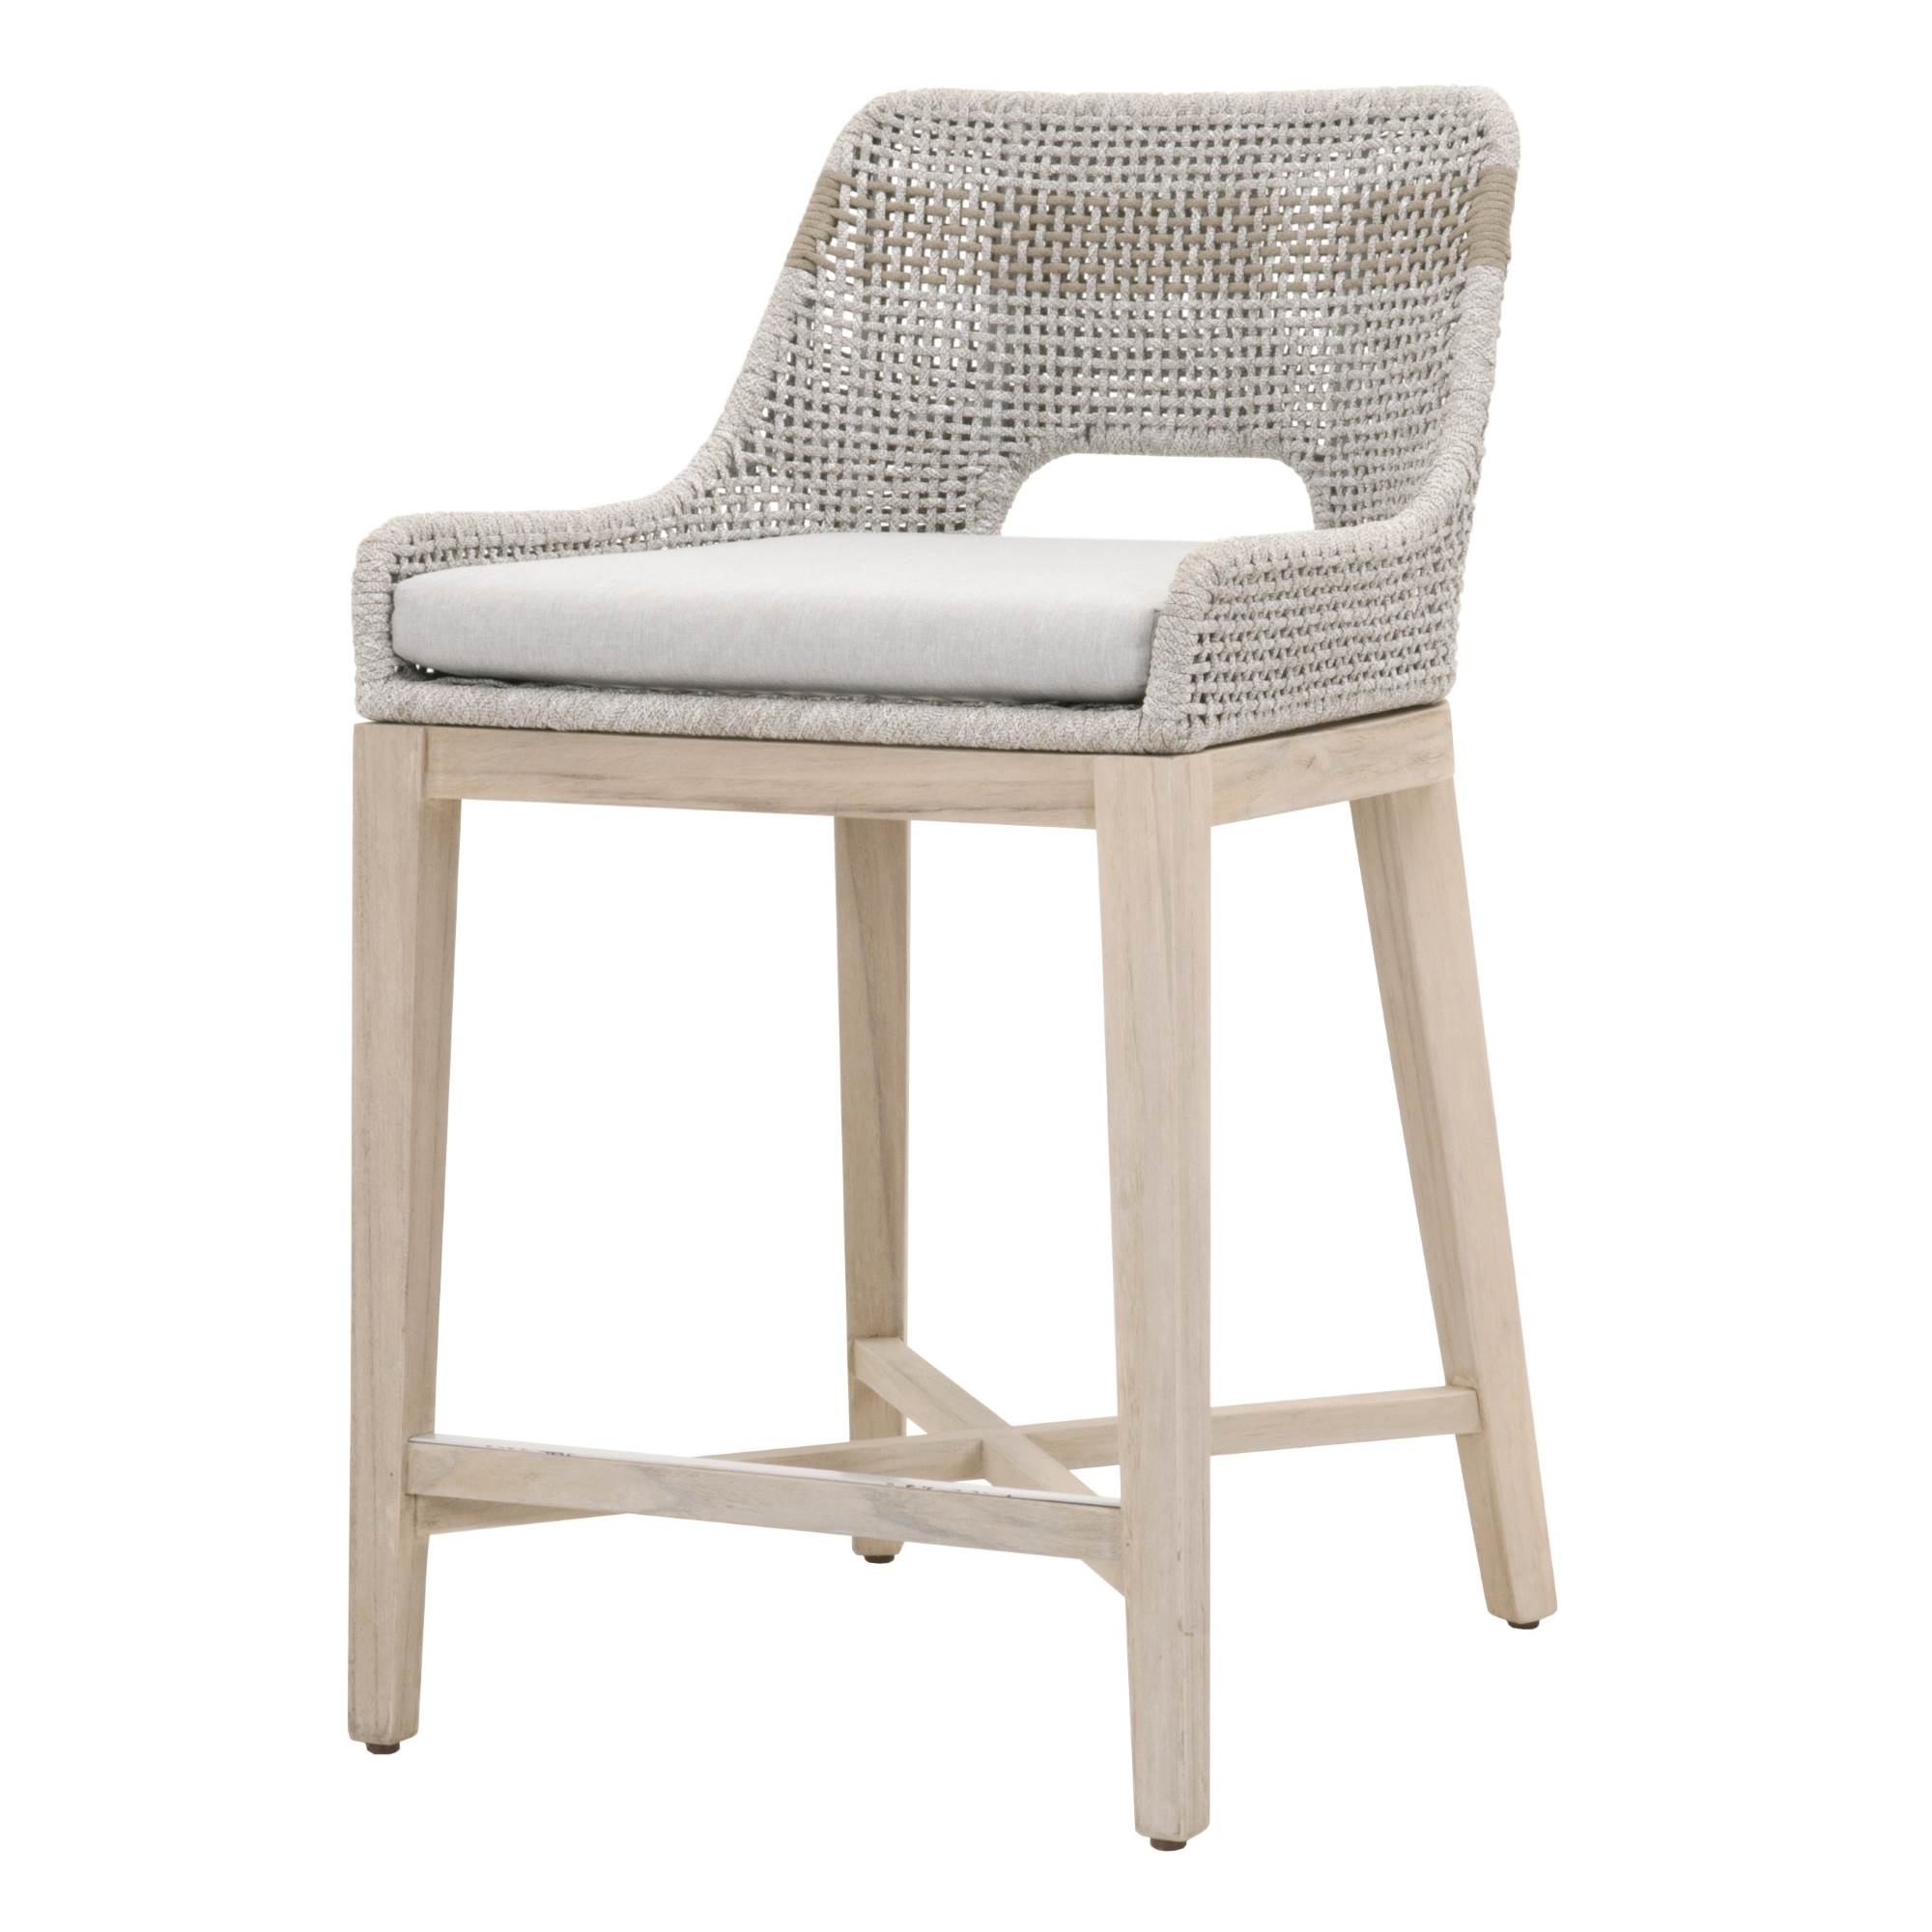 Tapestry Outdoor Counter Stool, Gray - Image 1